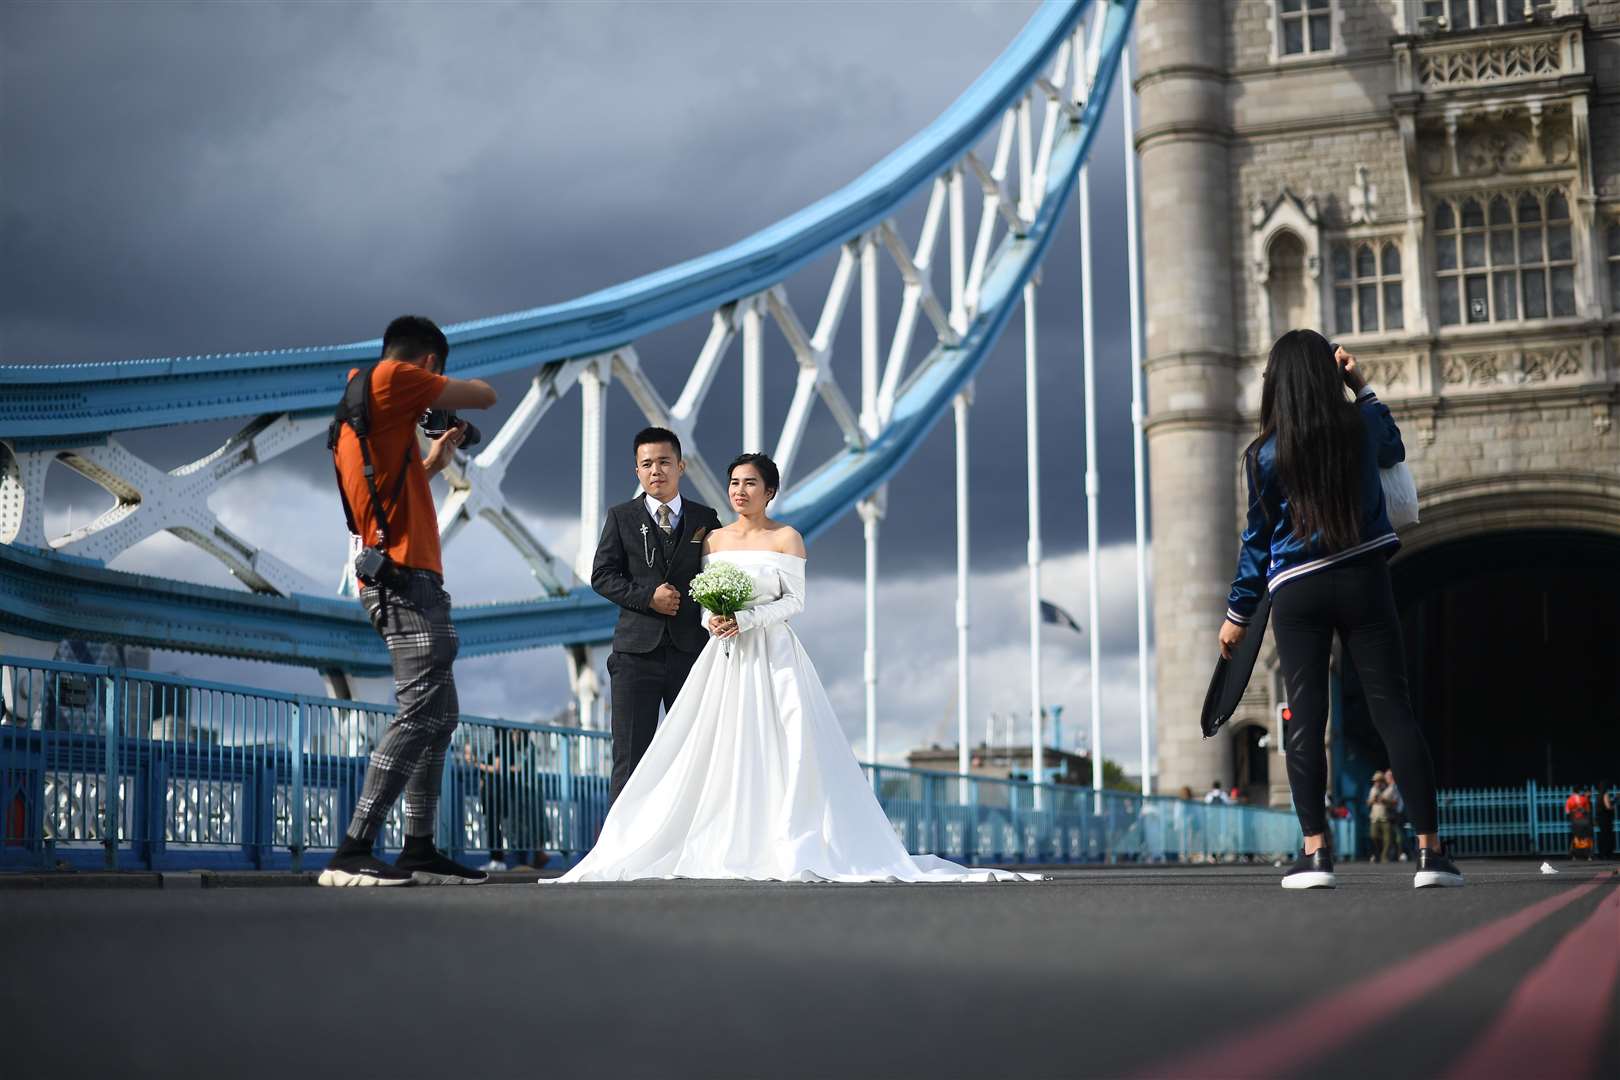 Tower Bridge served as an impressive backdrop for the happy couple (Victoria Jones/PA)